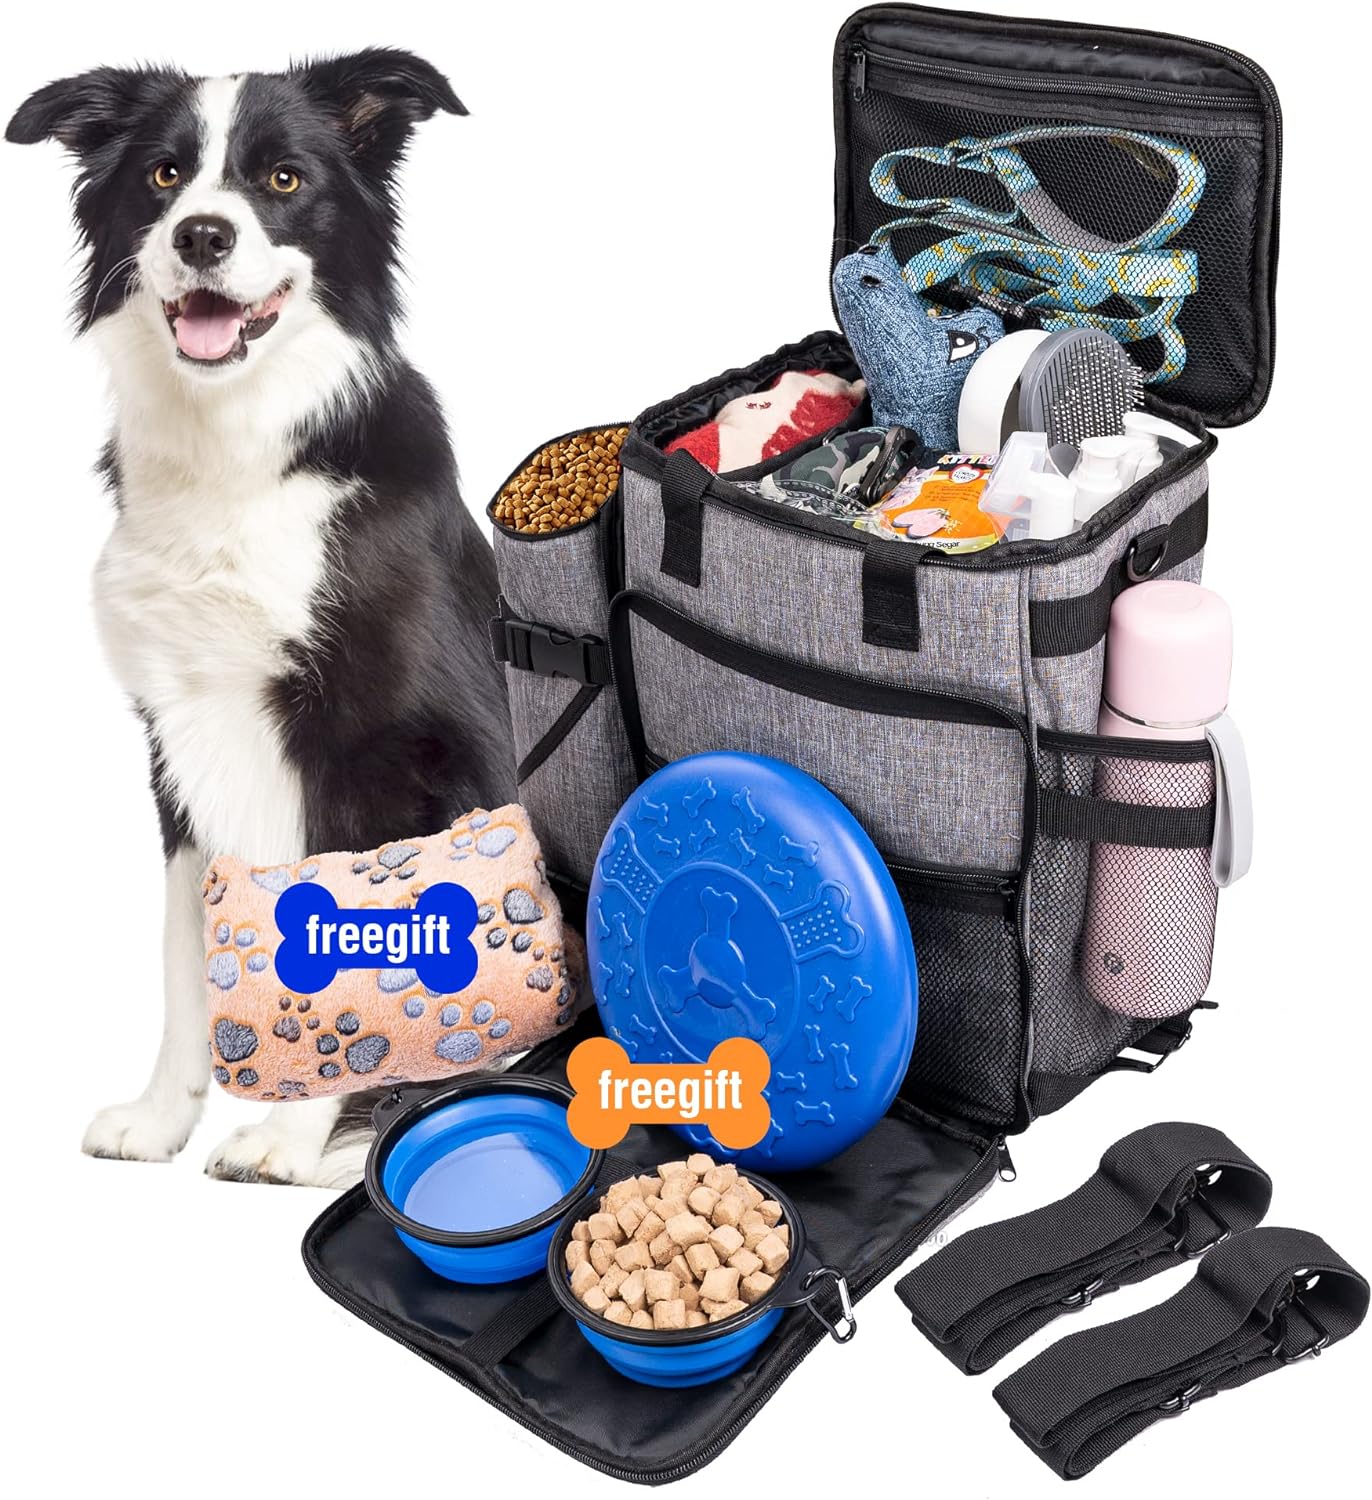 MOEPIE Dog Travel Bag, 6 Sets Airline Approved Dog Travel Backpack for Supplies Pet Bags for Travel – Dog Camping Gear Diaper Bag with 2 Bowls, 1 Blanket,1 Food Container, 1 Flying Discs, Grey